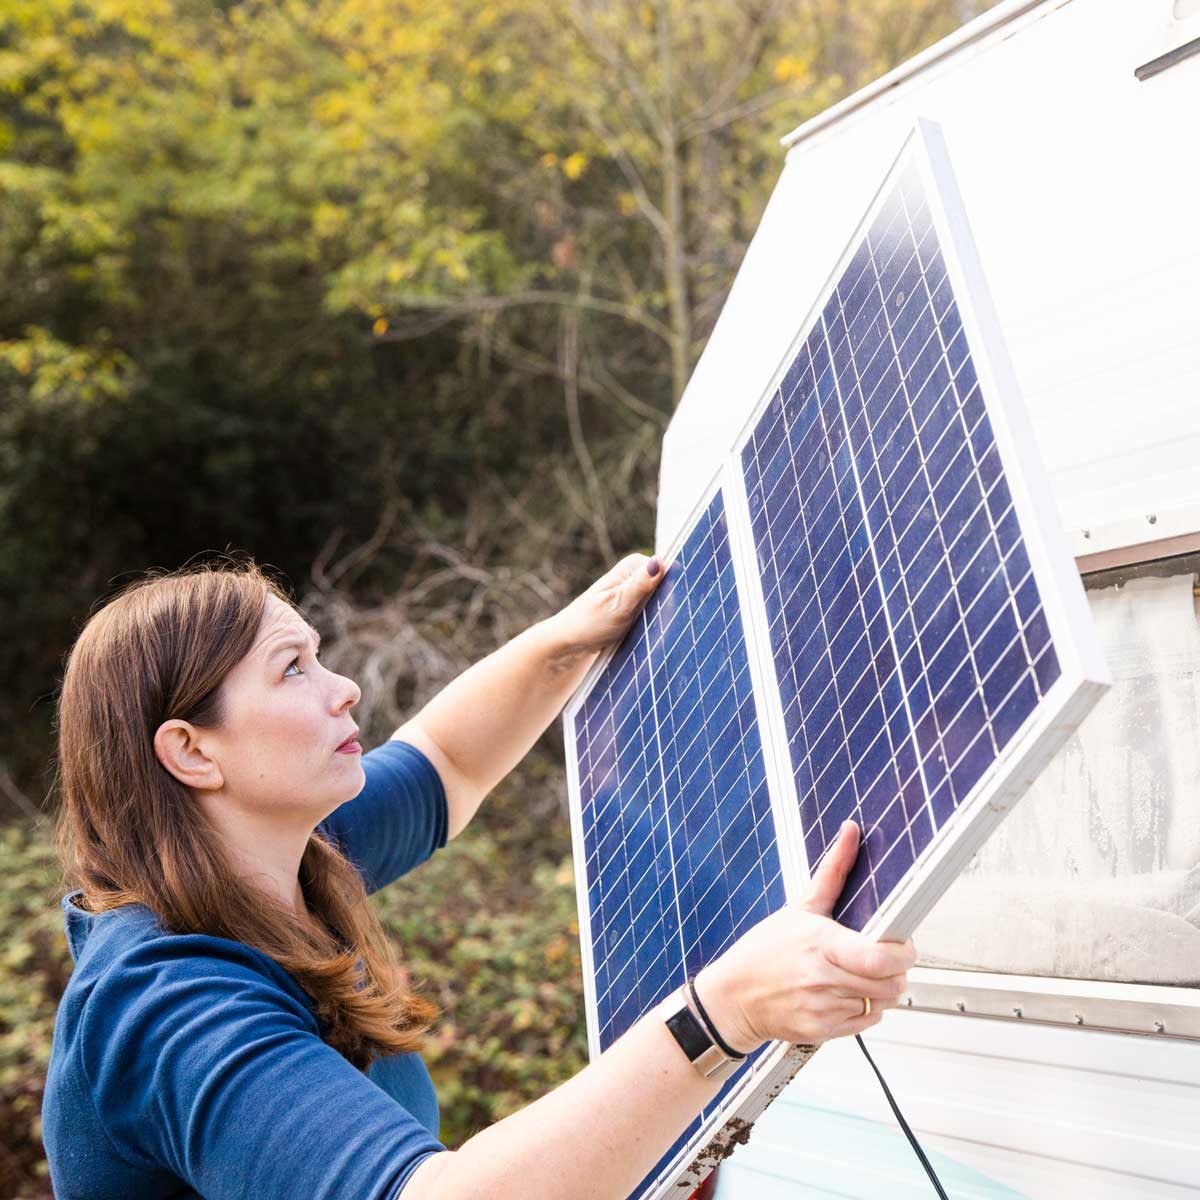 Top Rated RV Solar Panels and Kits To Enhance Your RV Journey